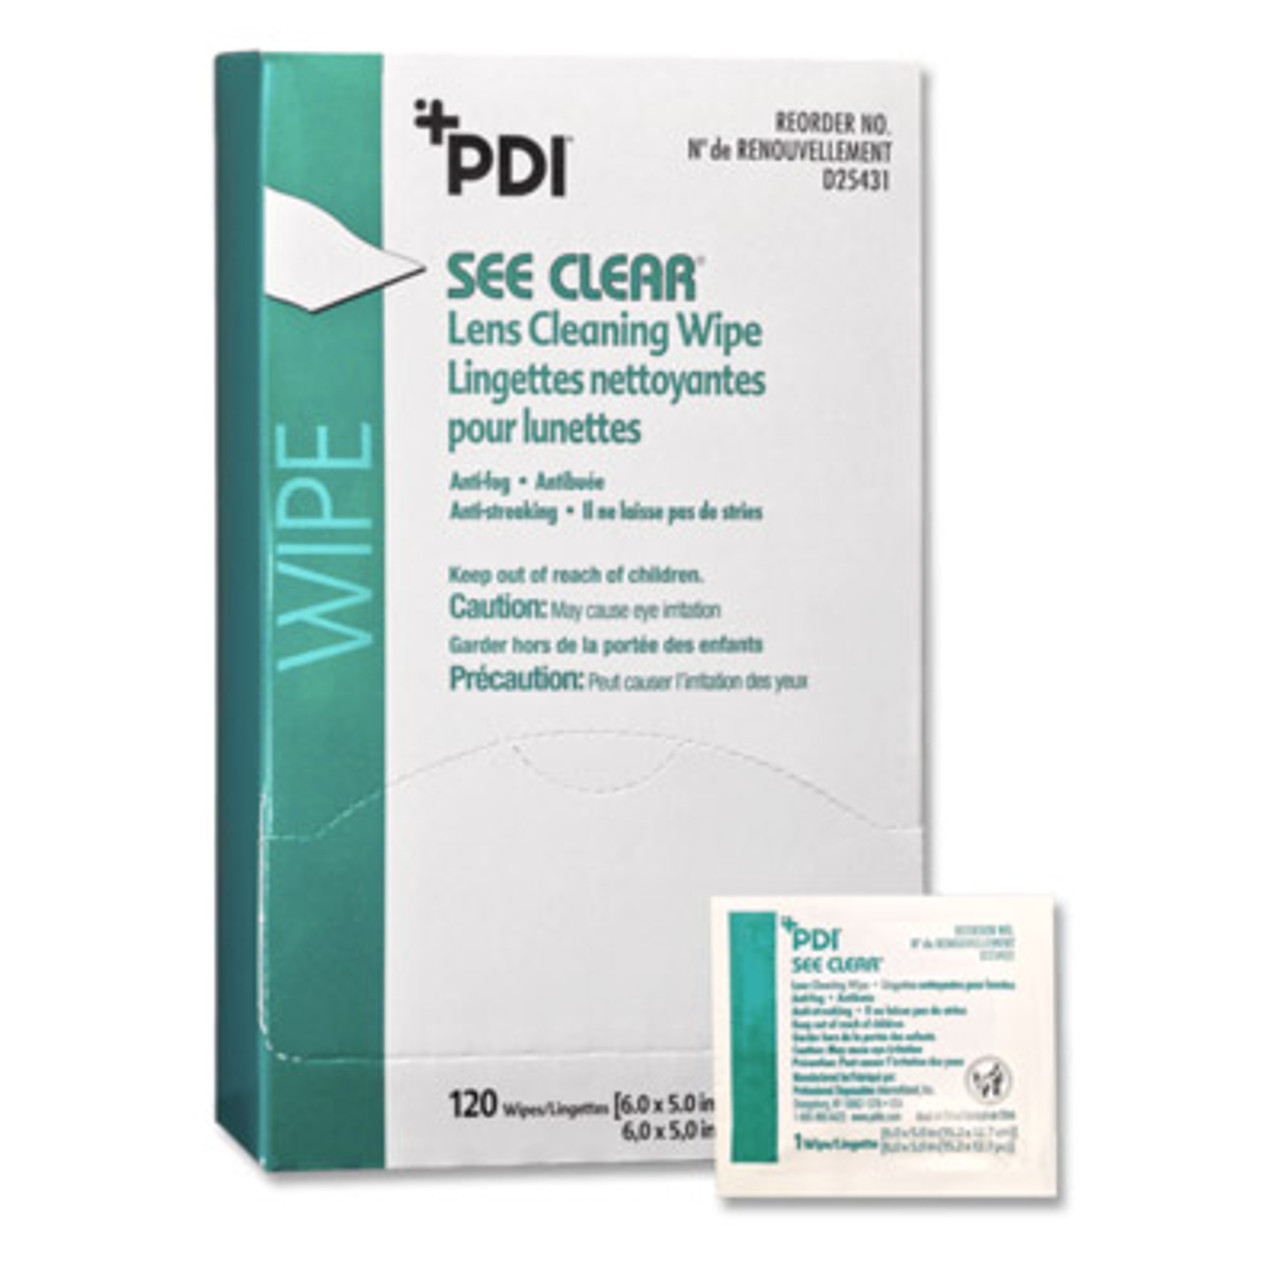 PDI SEE CLEAR EYE GLASS CLEANING WIPE, D25431